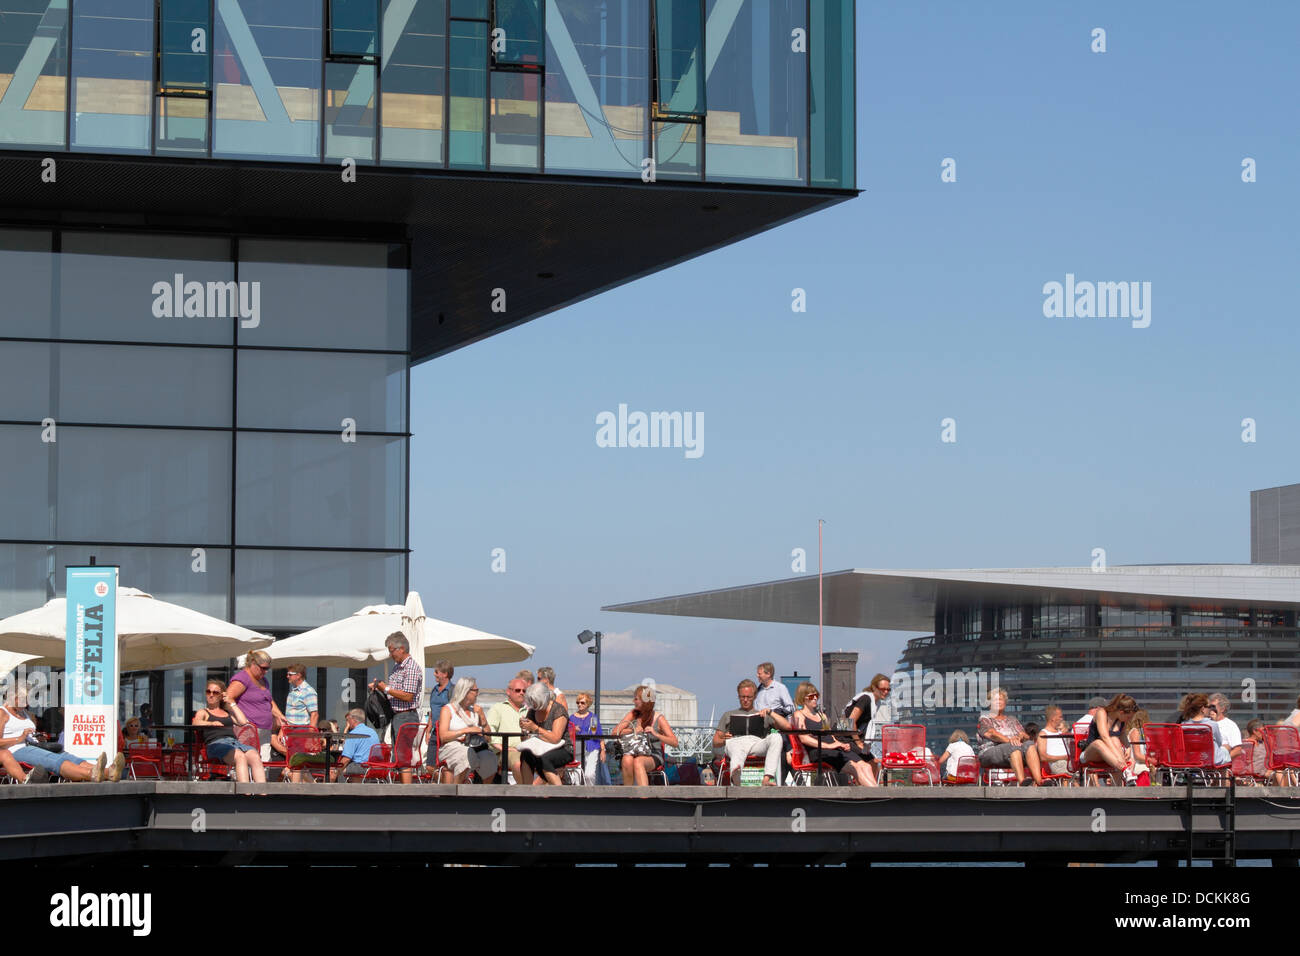 The Royal Danish Playhouse with dockside restaurant Ofelia in Copenhagen harbour. The Royal Danish Opera House seen on opposite side of harbour canal. Stock Photo